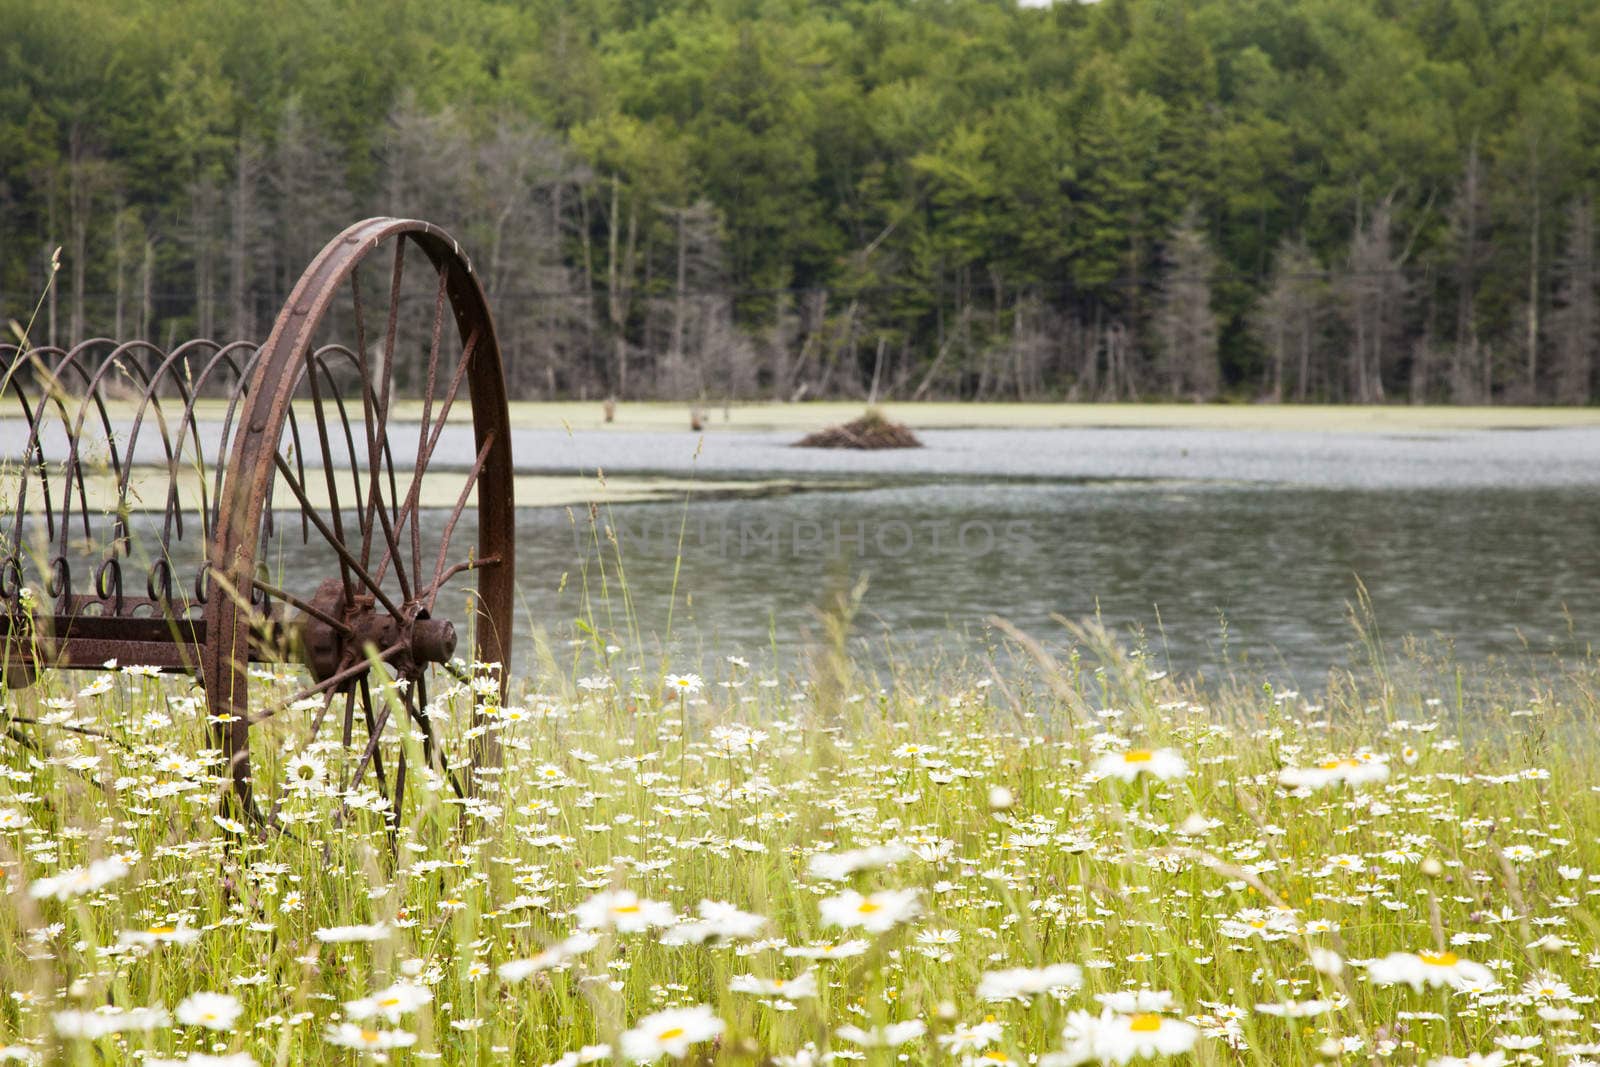 A rural daisy field with a rusted antique farm equipment.